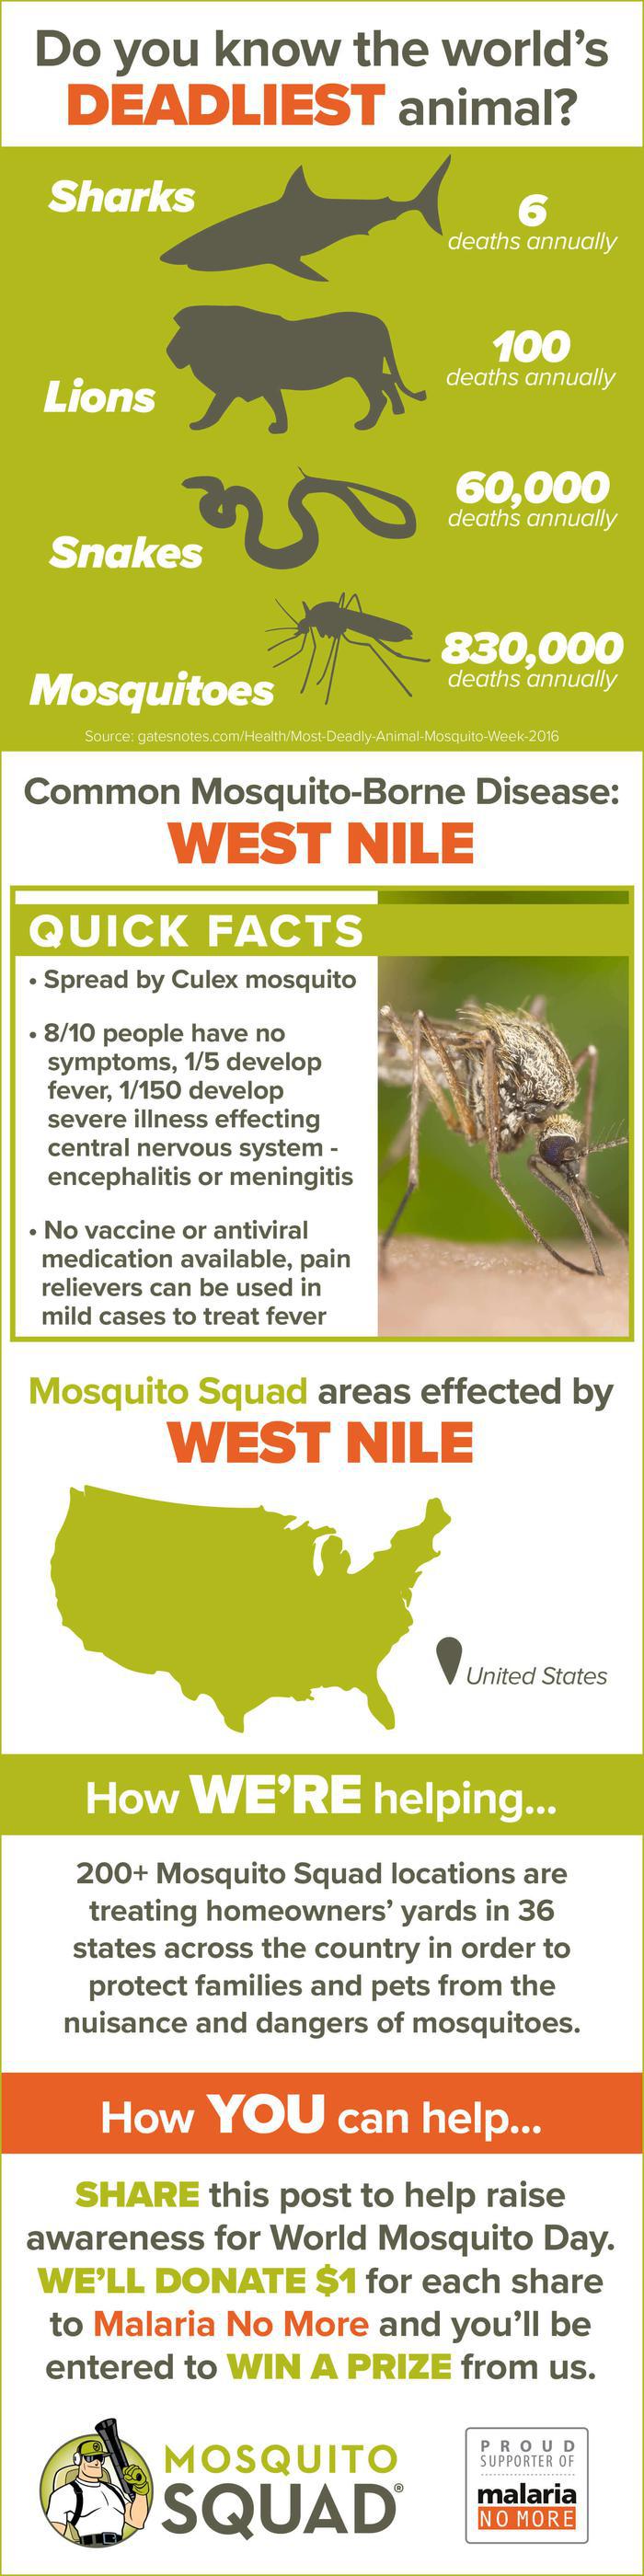 West Nile Virus Facts to Know Before World Mosquito Day